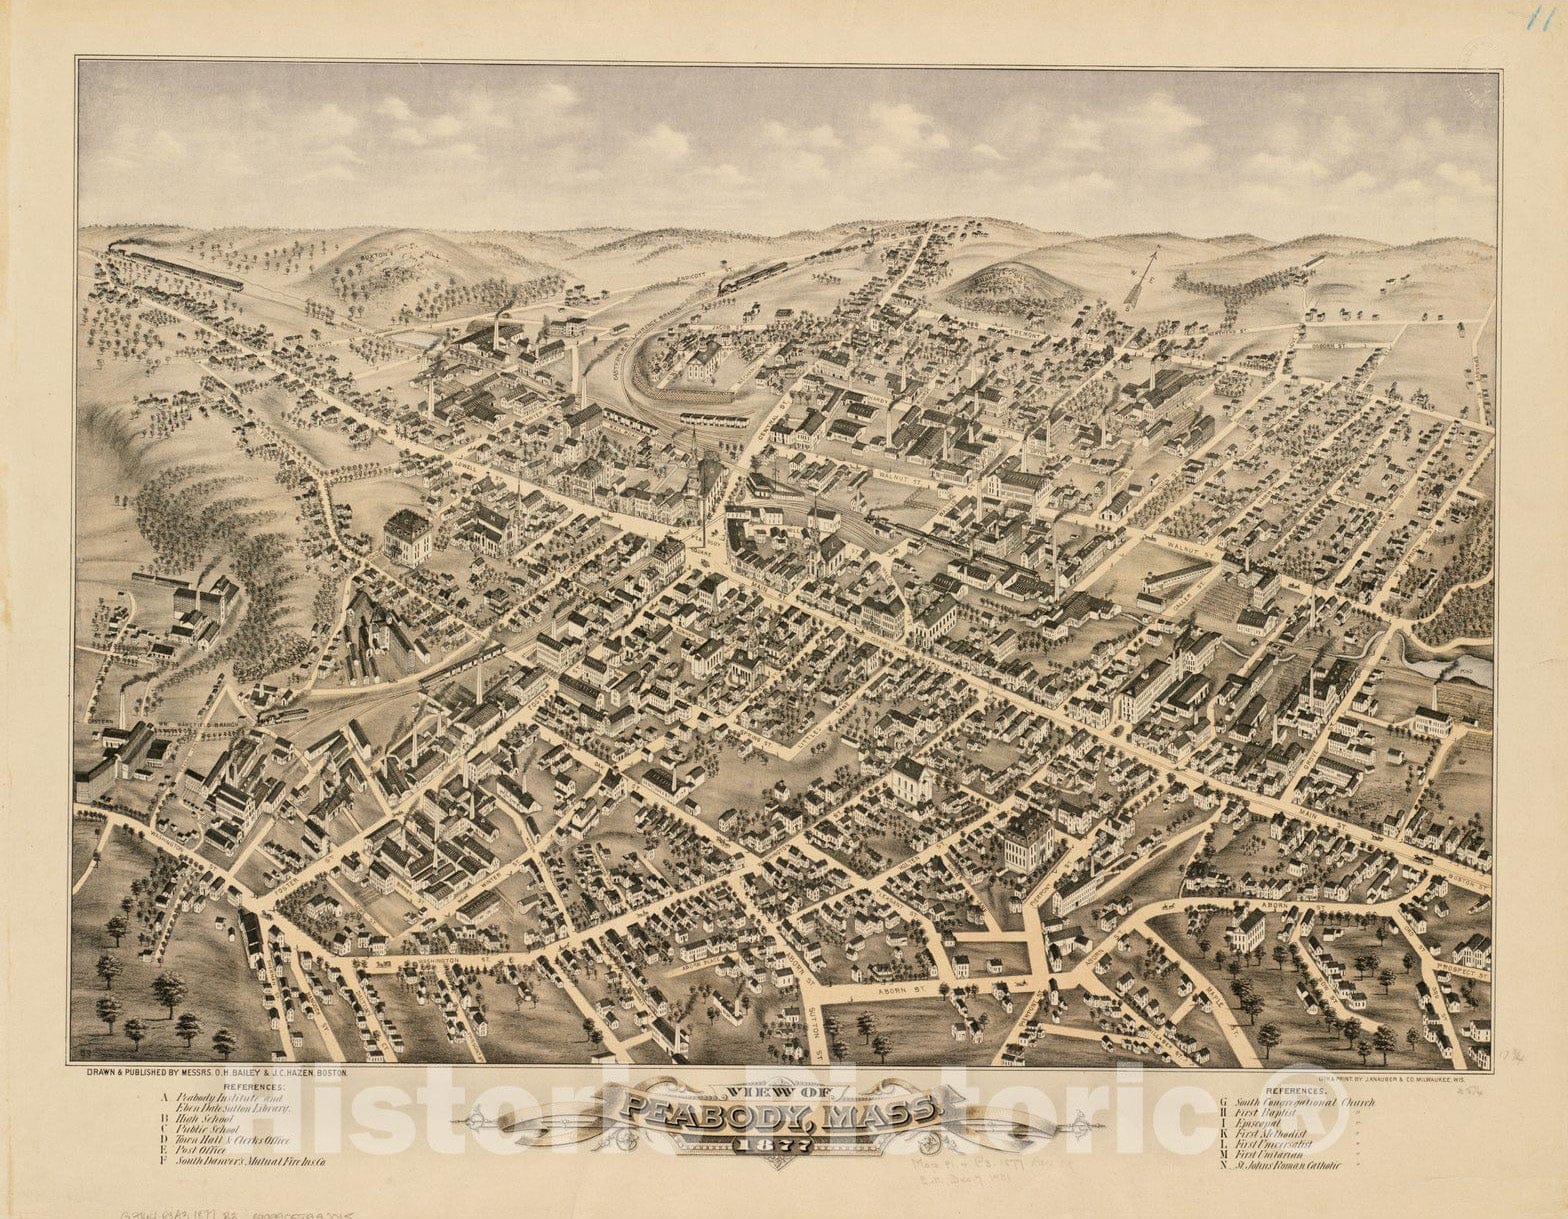 Historical Map, View of Peabody, Mass : 1877, Vintage Wall Art